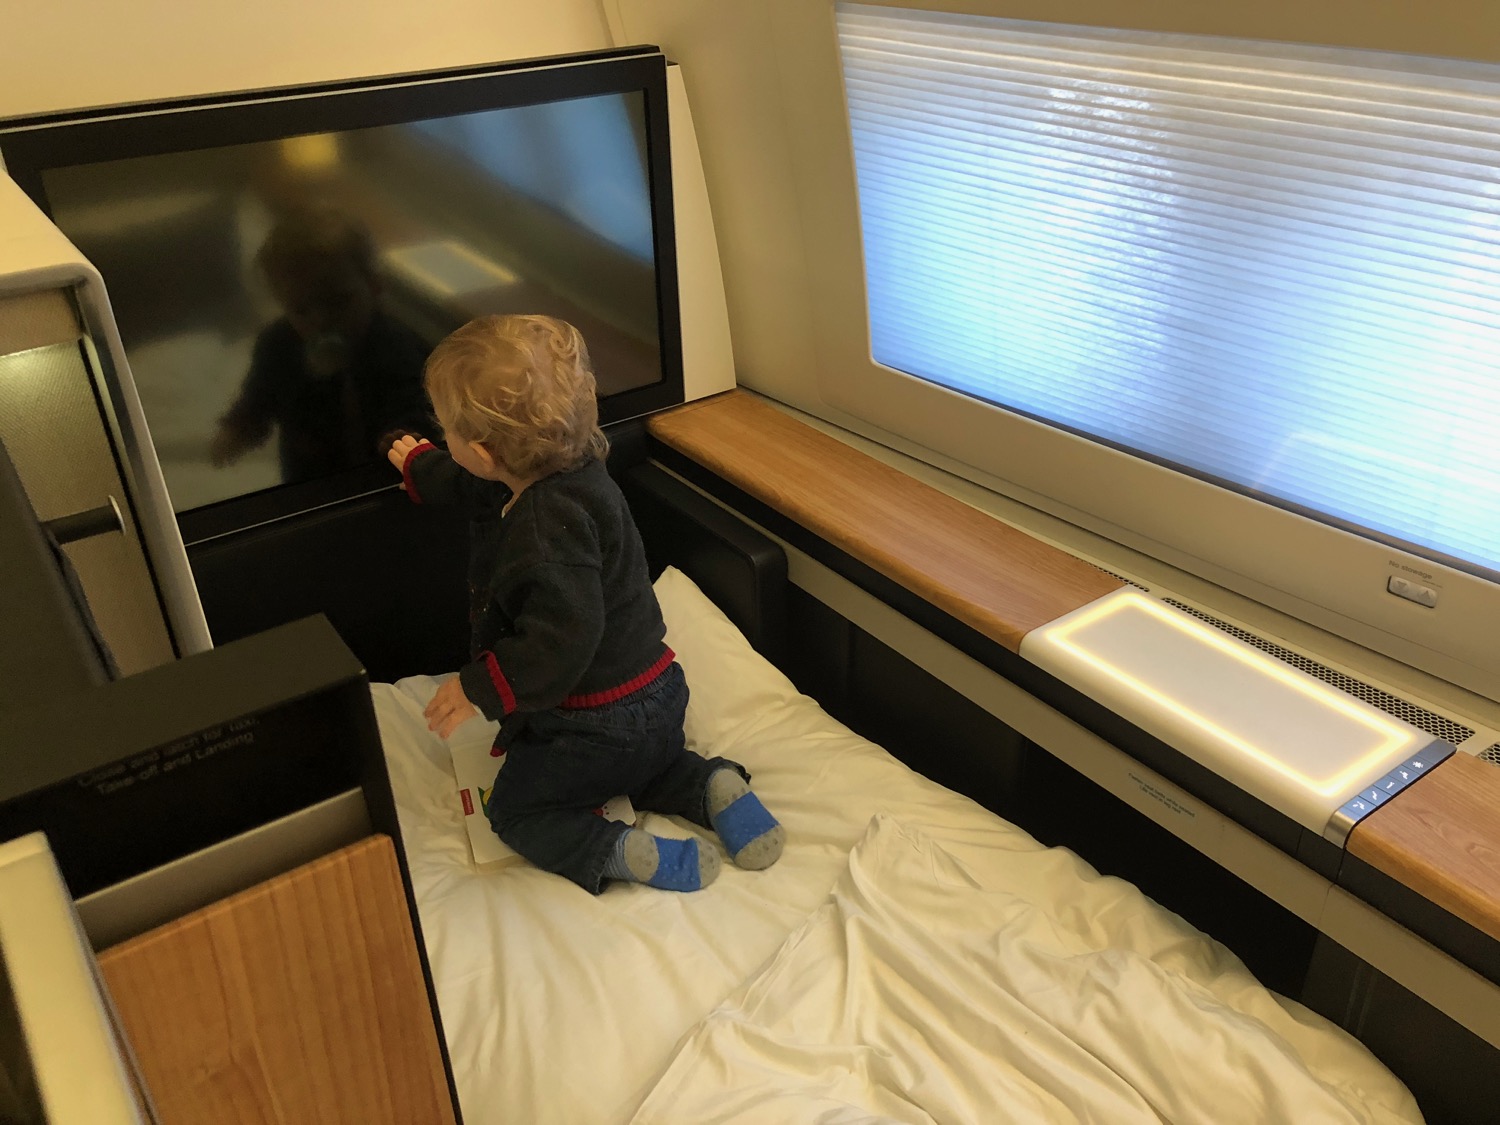 a child sitting on a bed watching a television